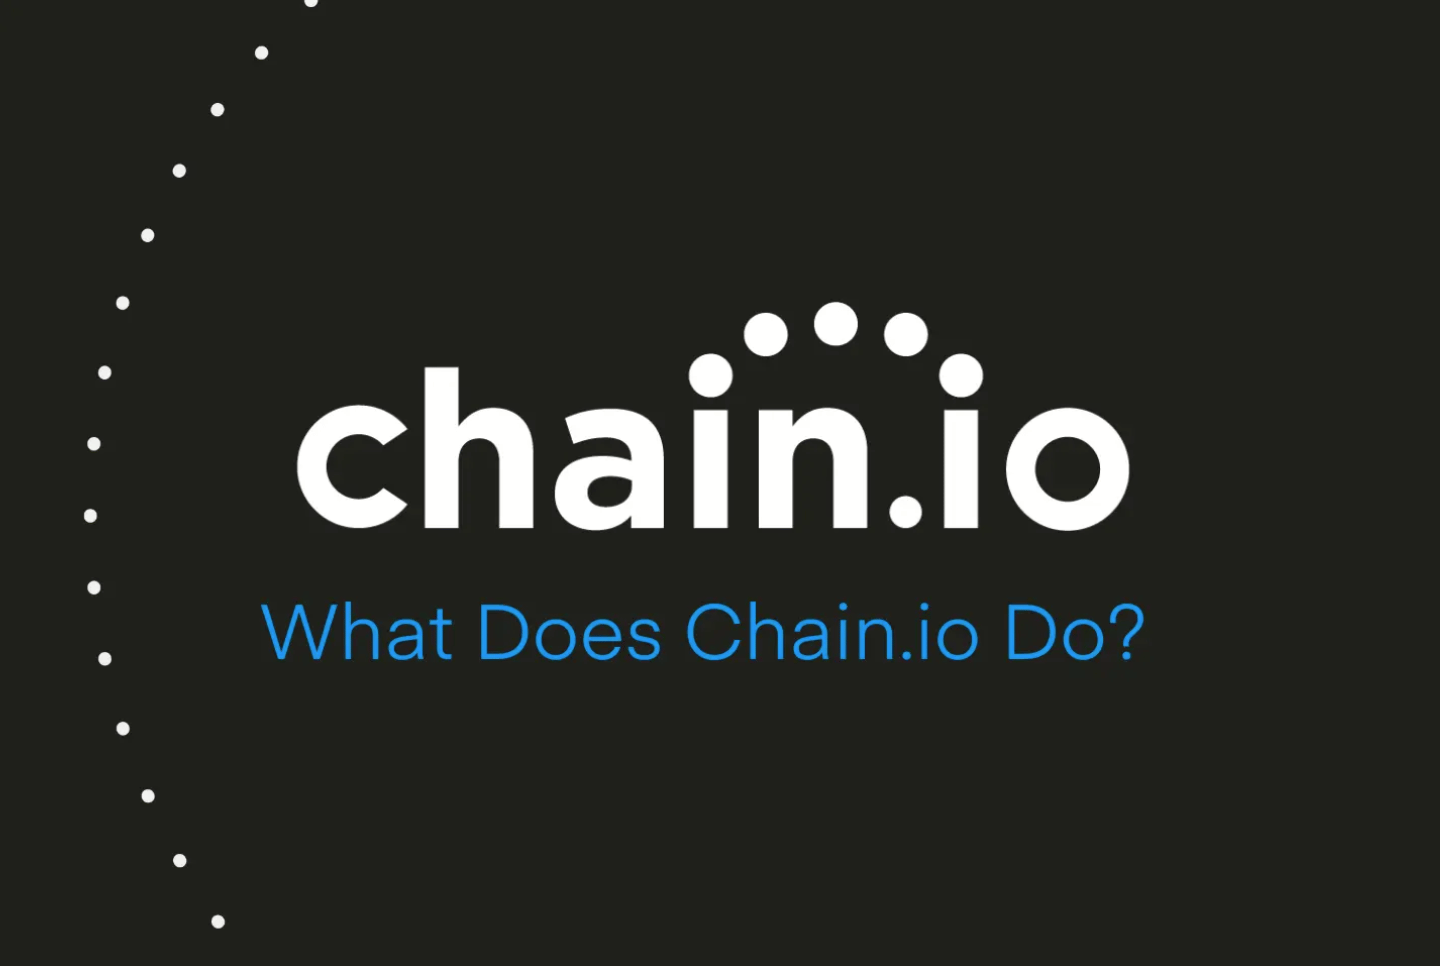 Learn about how Chain.io's neutral supply chain integration platform helps enable supply chain collaboration.